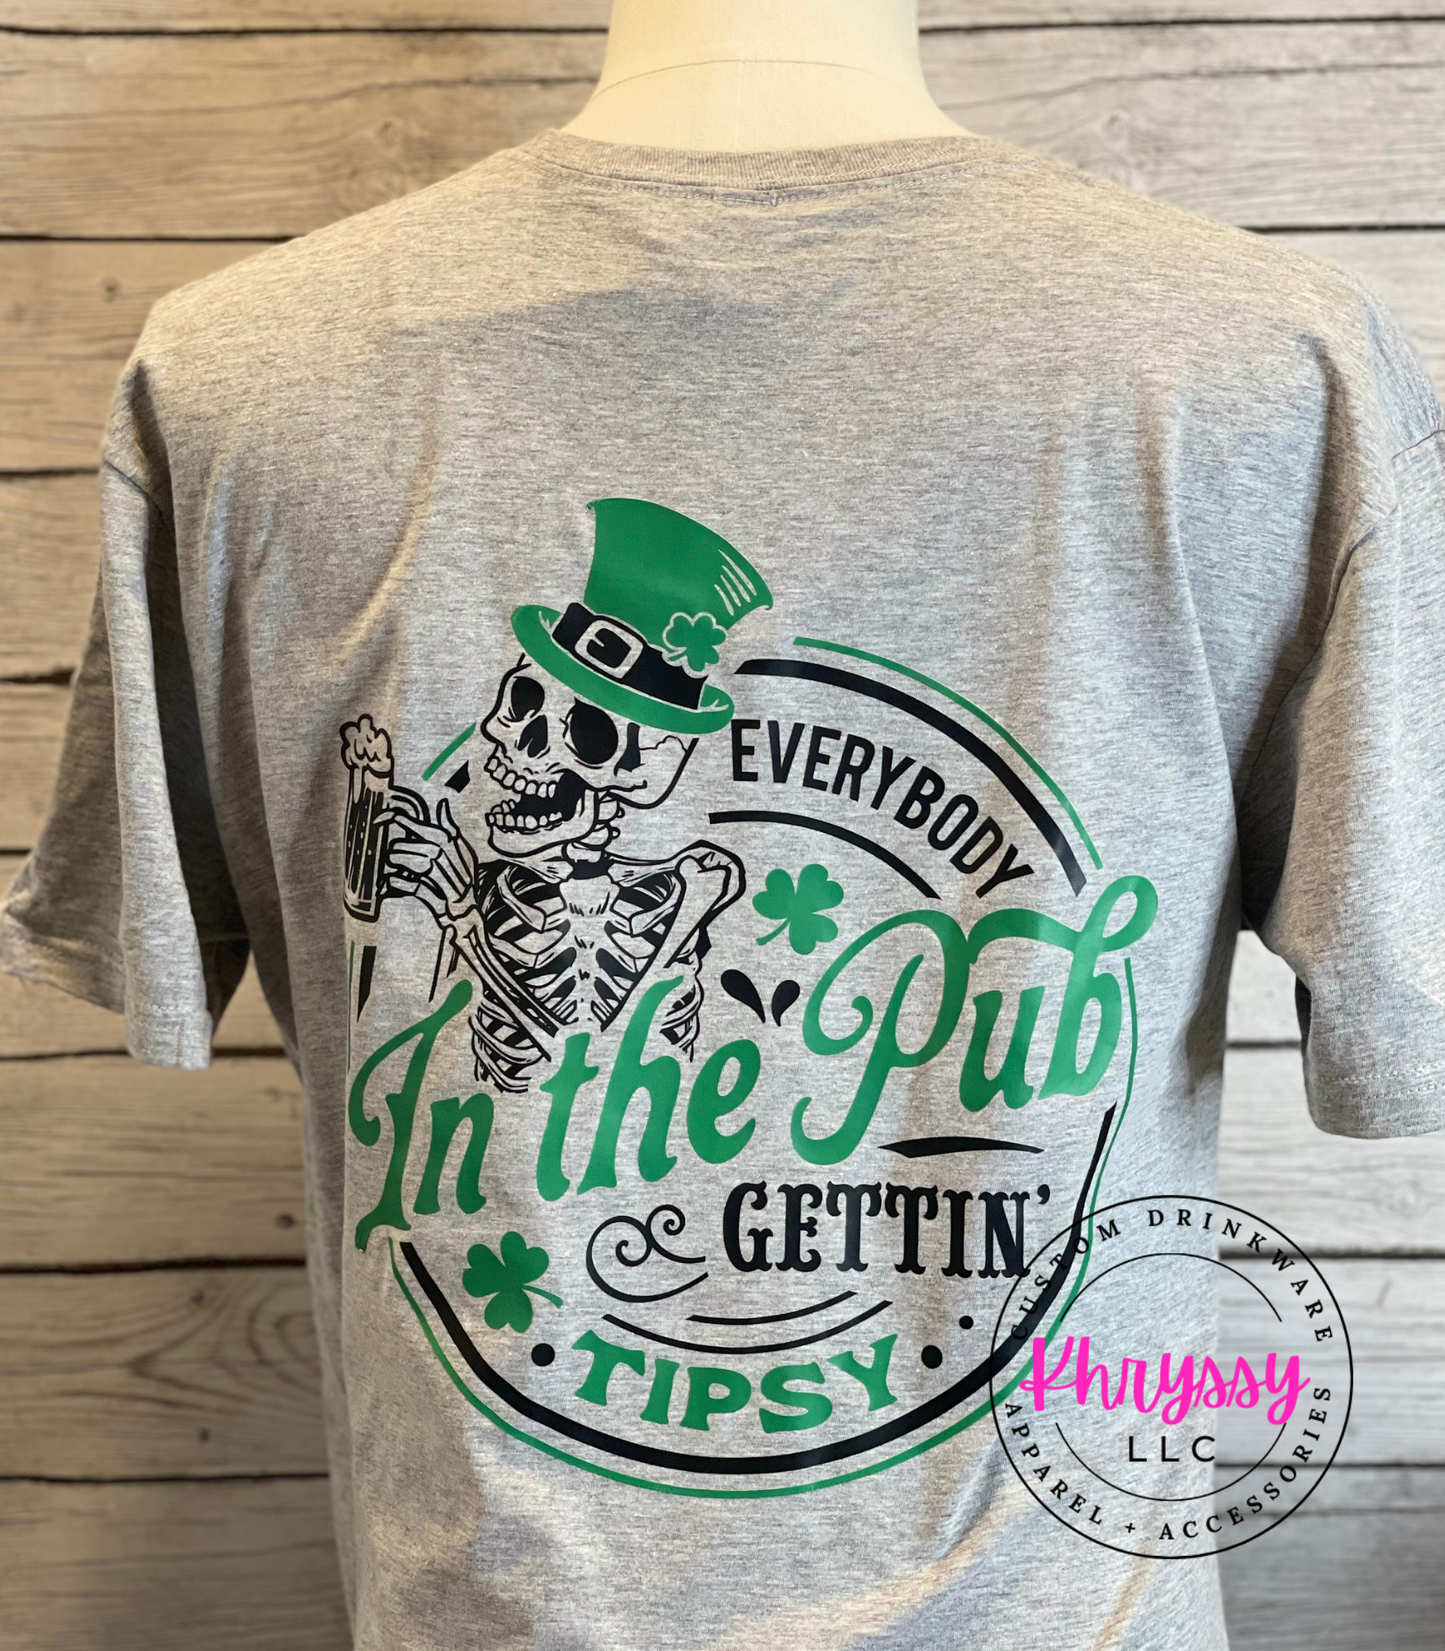 READY TO SHIP: St. Patrick's Day - Everybody in the Pub Getting Tipsy Unisex Shirt